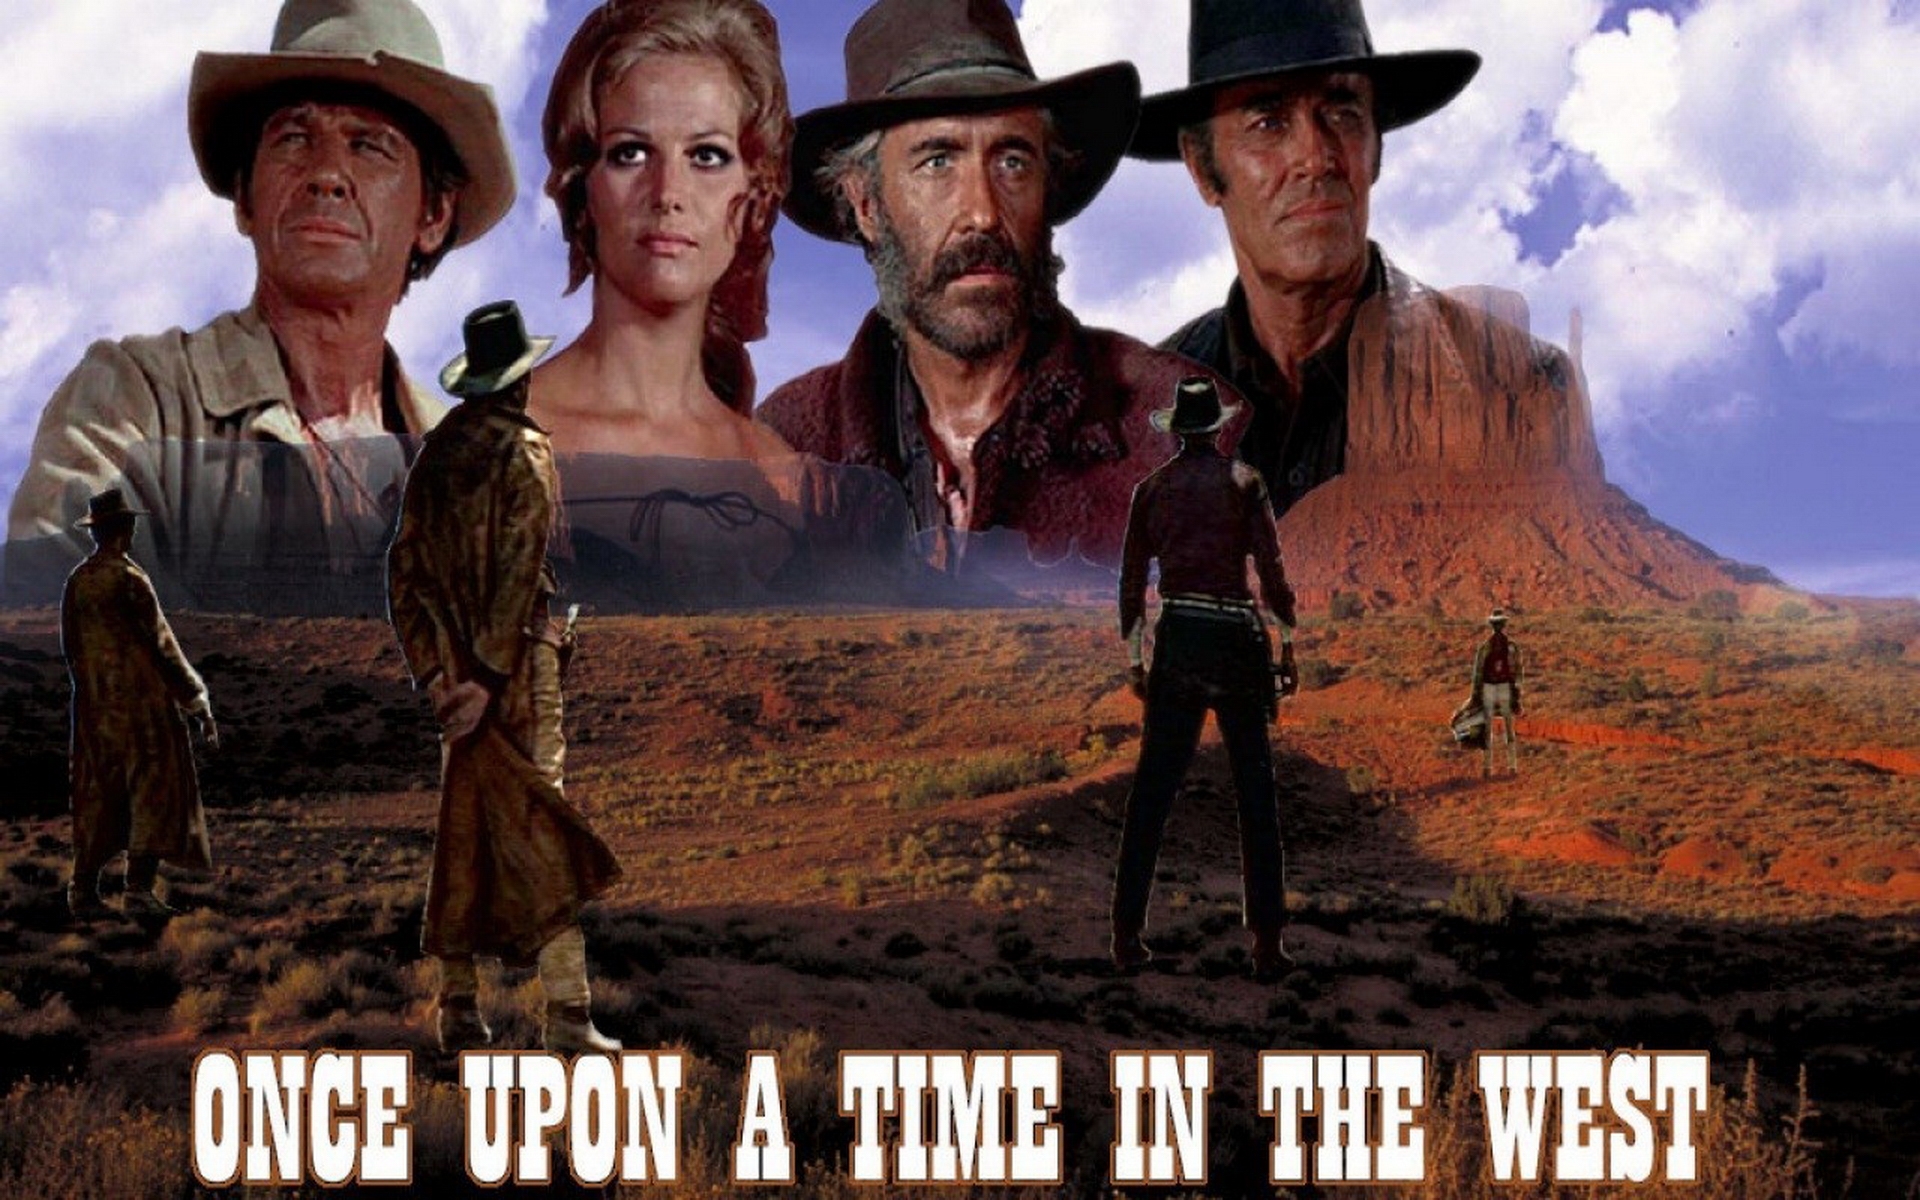 Once Upon a Time in the West Wallpaper Upon a Time